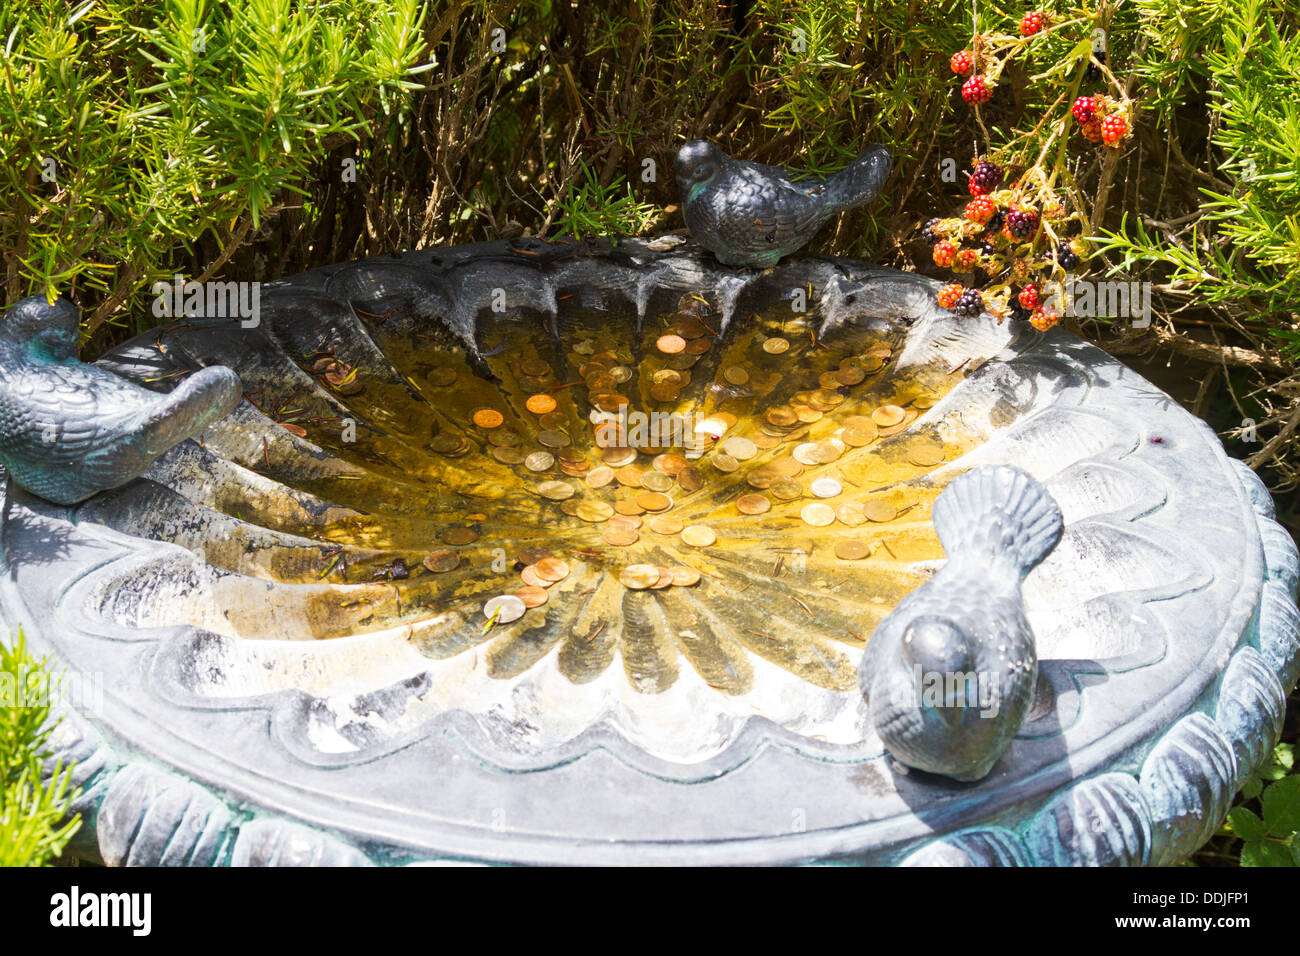 Coins in a bird bath from people hoping for a wish. Stock Photo